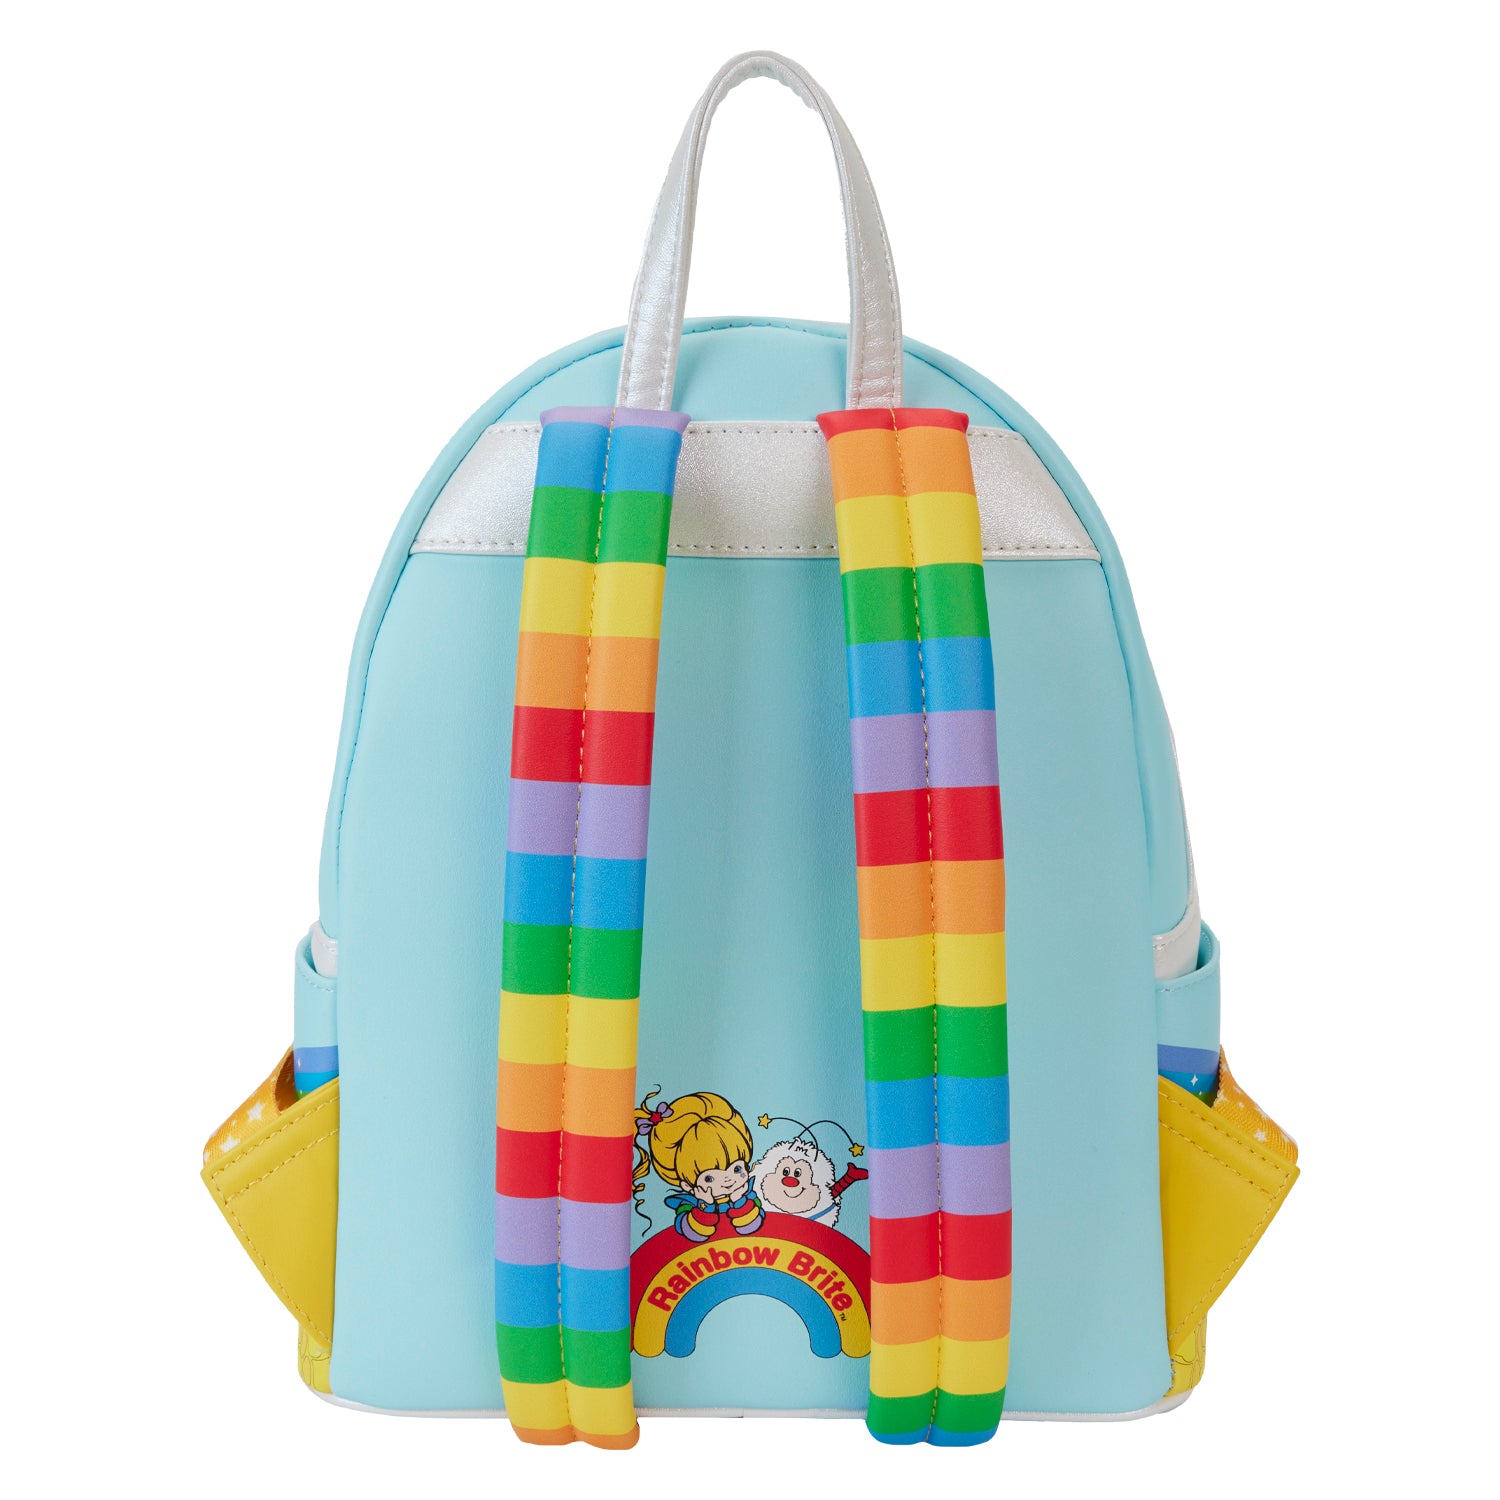 Loungefly Rainbow Brite Castle Group Mini Backpack